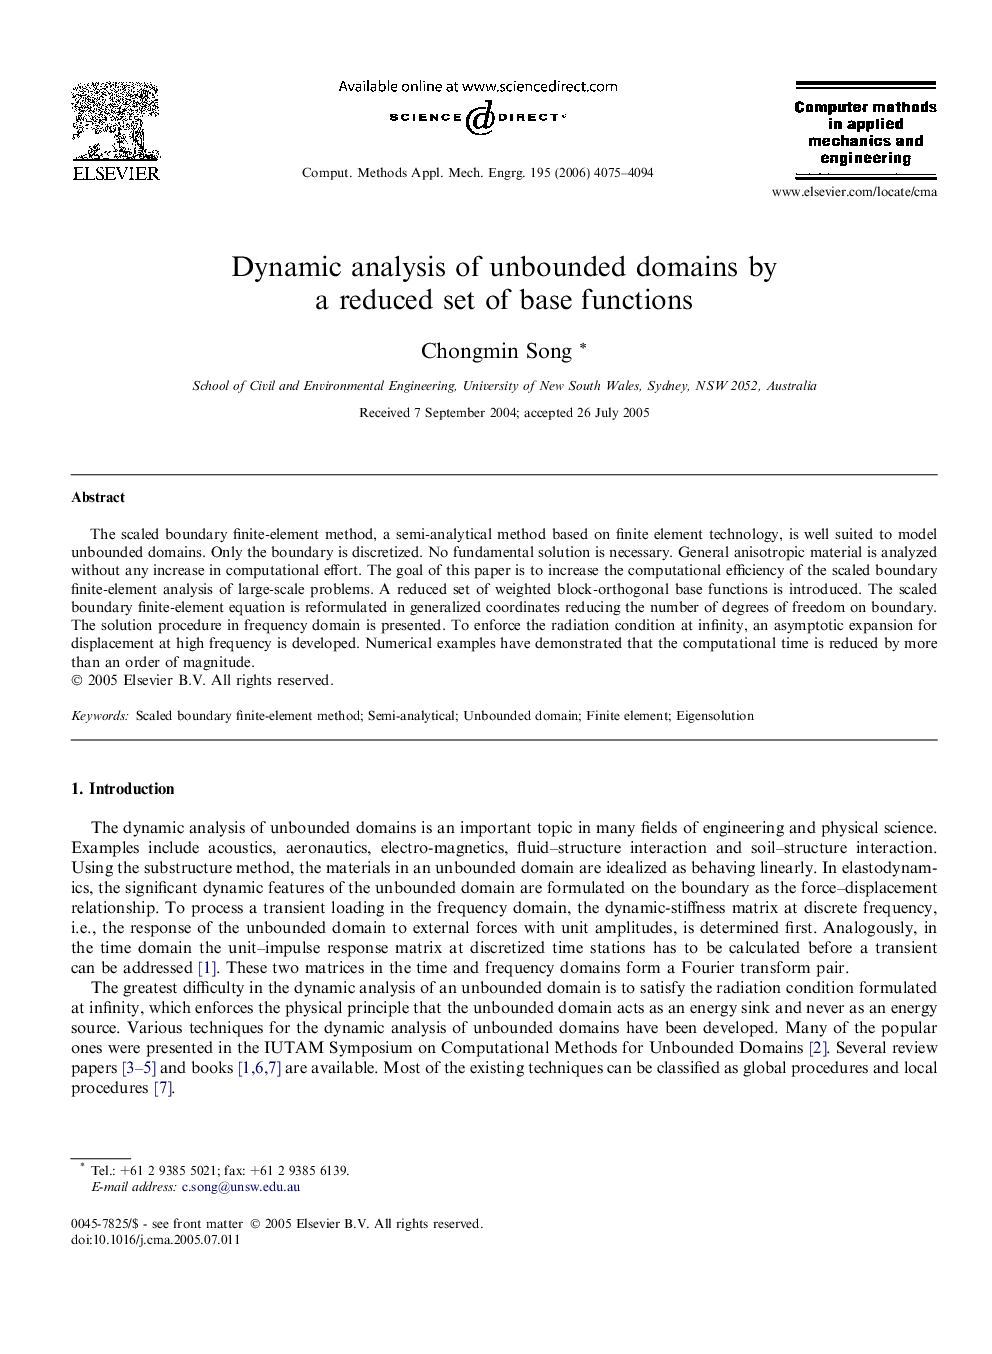 Dynamic analysis of unbounded domains by a reduced set of base functions